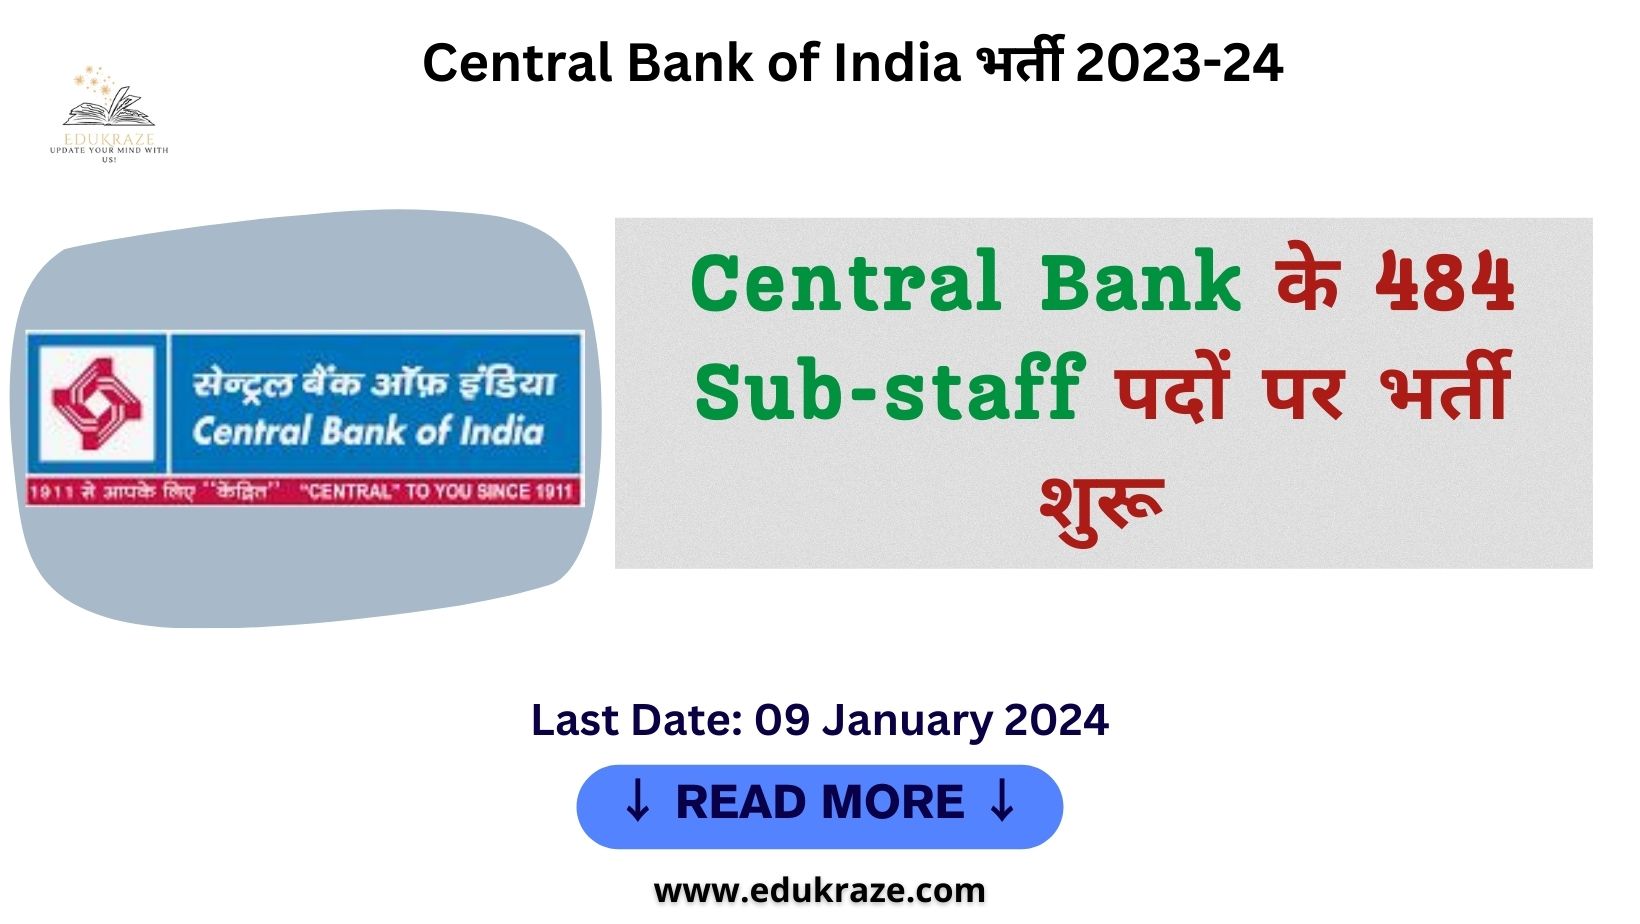 Central Bank of India Sub-staff Recruitment out for 484 Posts